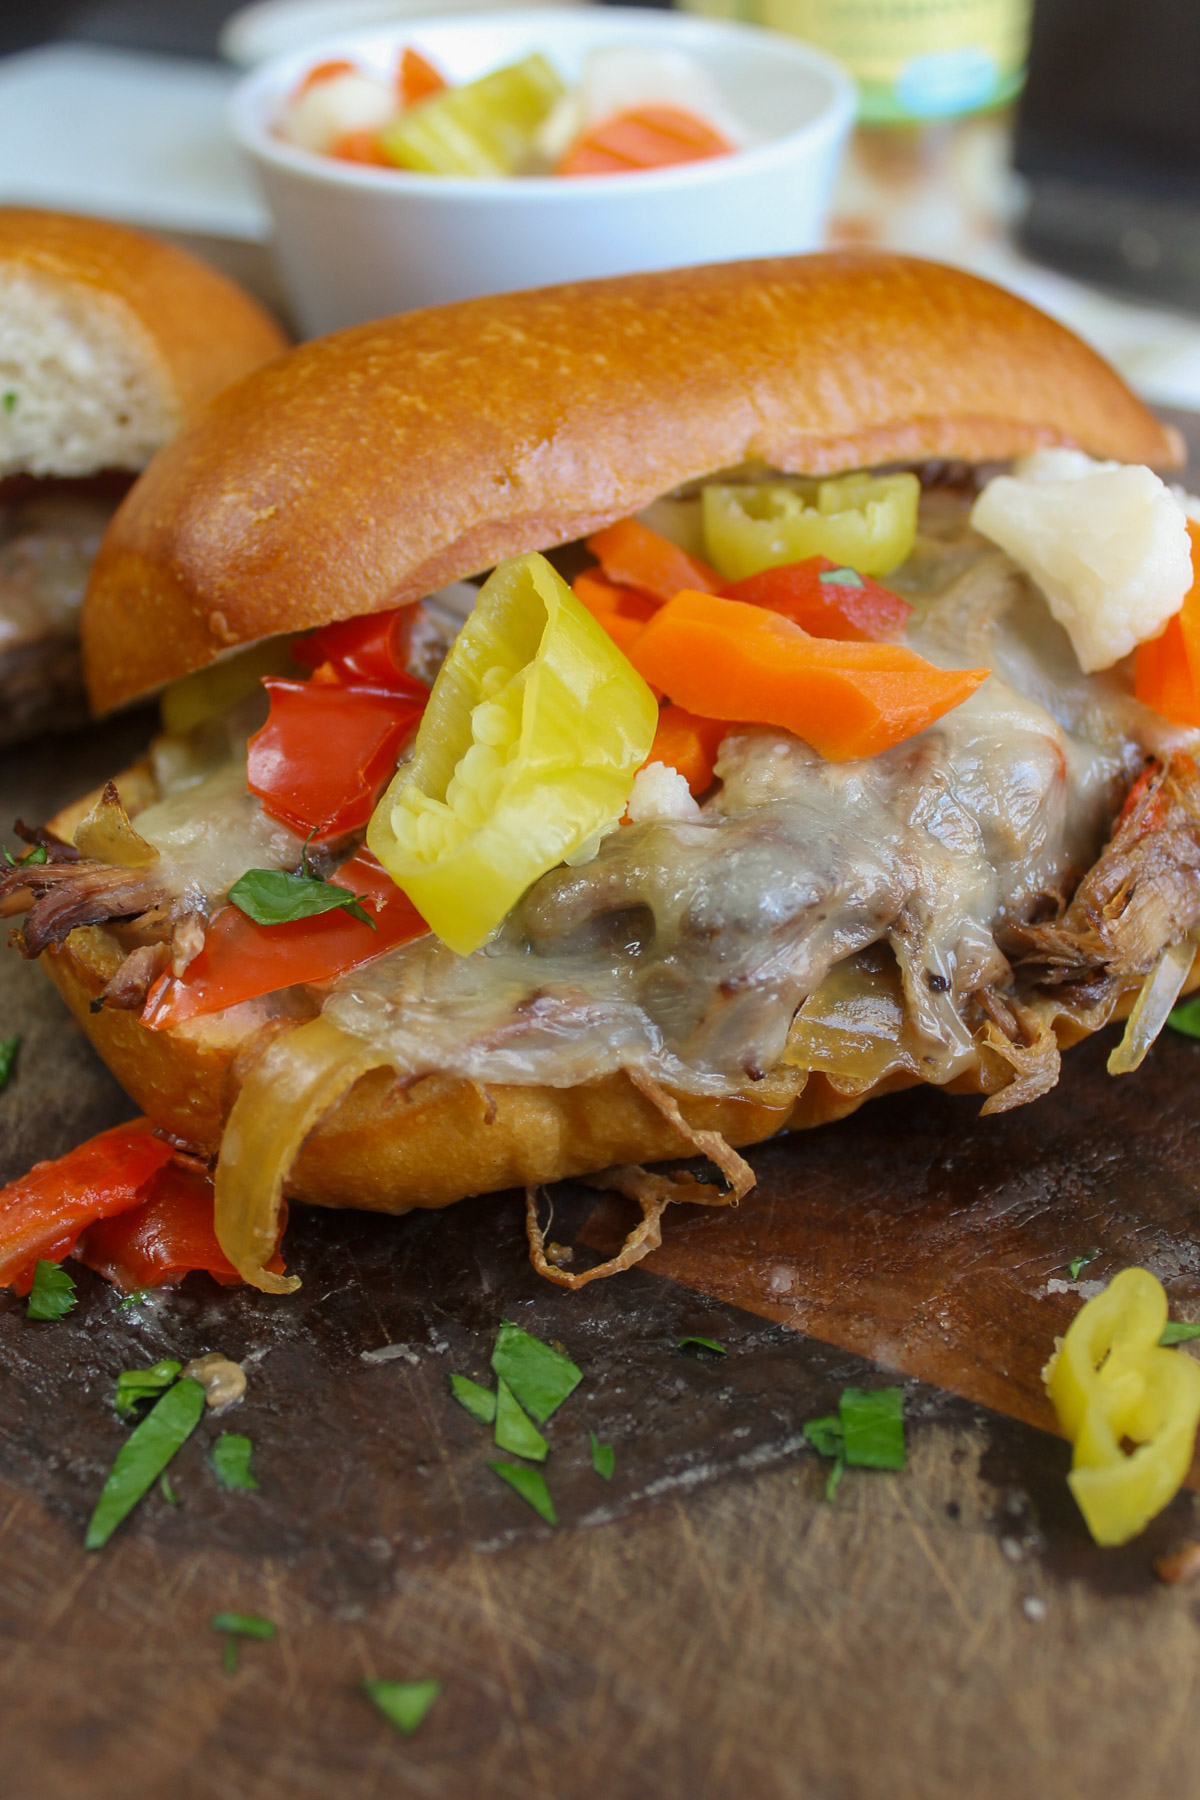 Italian Beef Melts with Provolone cheese and giardiniera.